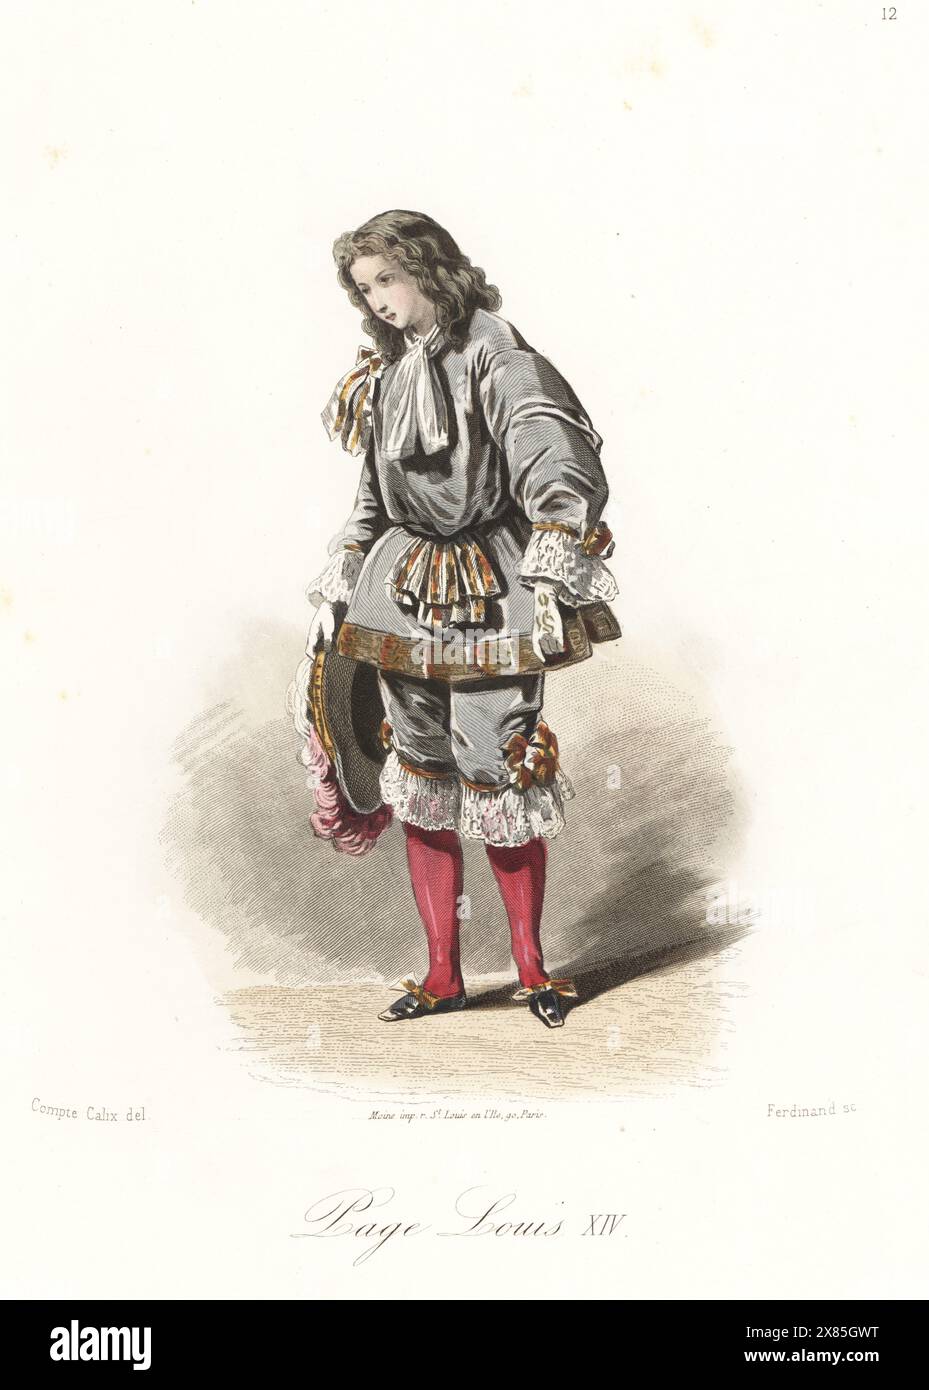 Woman in costume of a Page to King Louis XIV of France With long loose hair, cravat, doublet and breeches trimmed with lace, stockings and buckle shoes, holding a plumed hat. Handcoloured steel engraving by Ferdinand after an illustration by Francois Claudius Compte-Calix from Les travestissements élégants, Elegant Fancy Dress Costumes, Les Modes Parisiennes, Paris, 1853. Stock Photo